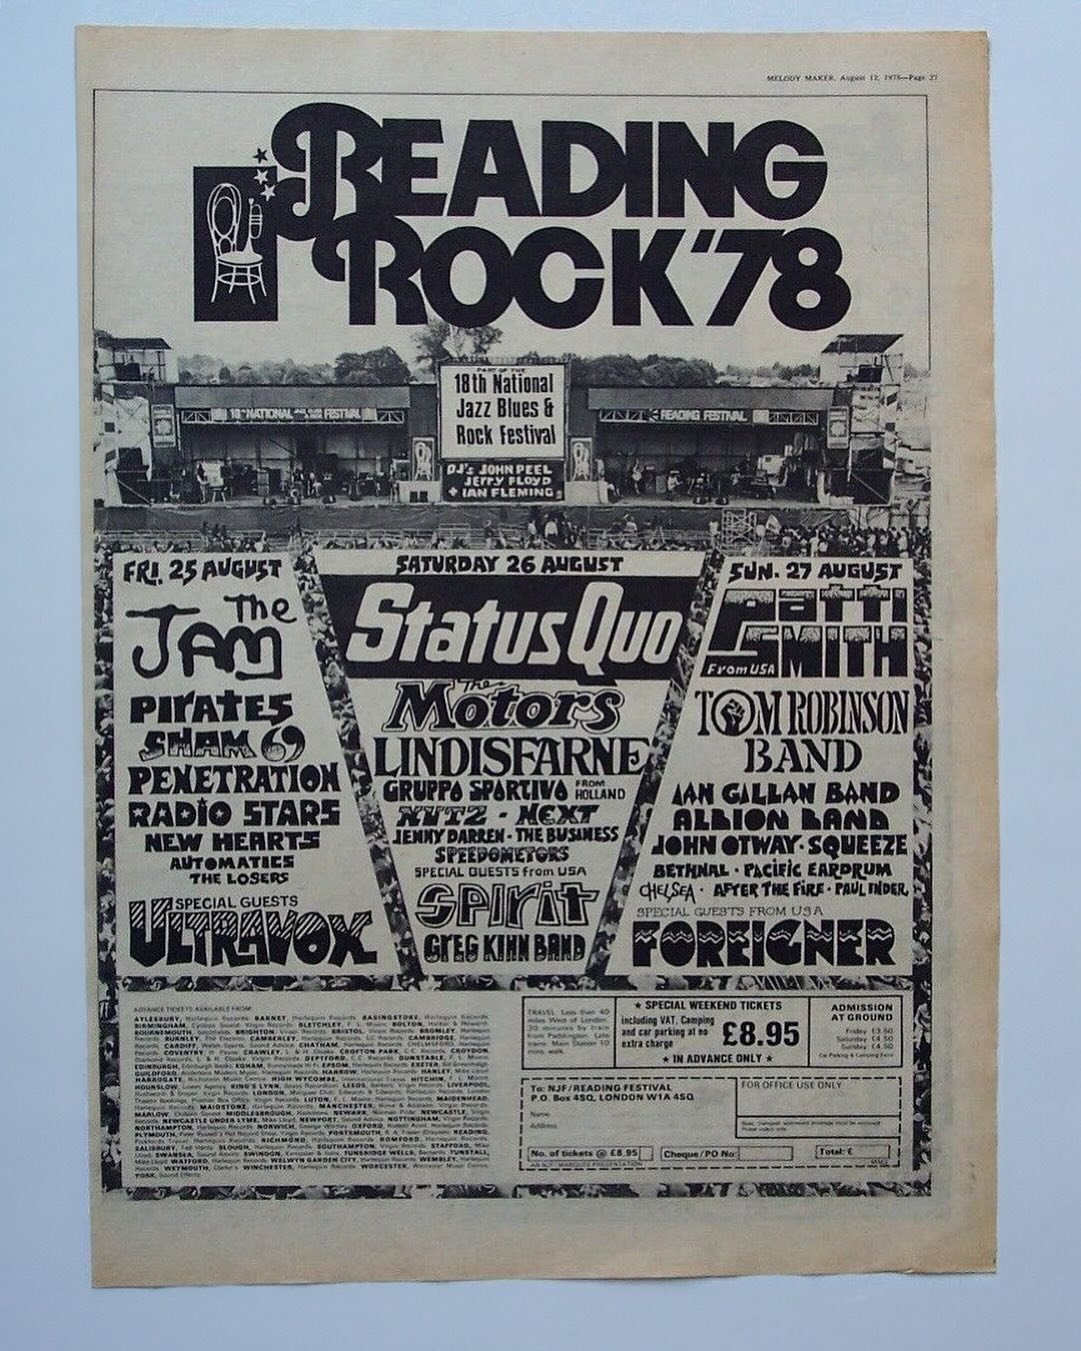 As music festival season kicks off, take a nostalgic trip back to the 1978 Reading Rock Festival, where Foreigner took the main stage by storm on day 3, sharing billing with legends like @thisispattismith and The Jam.

Setlist:
&ldquo;Long, Long Way 